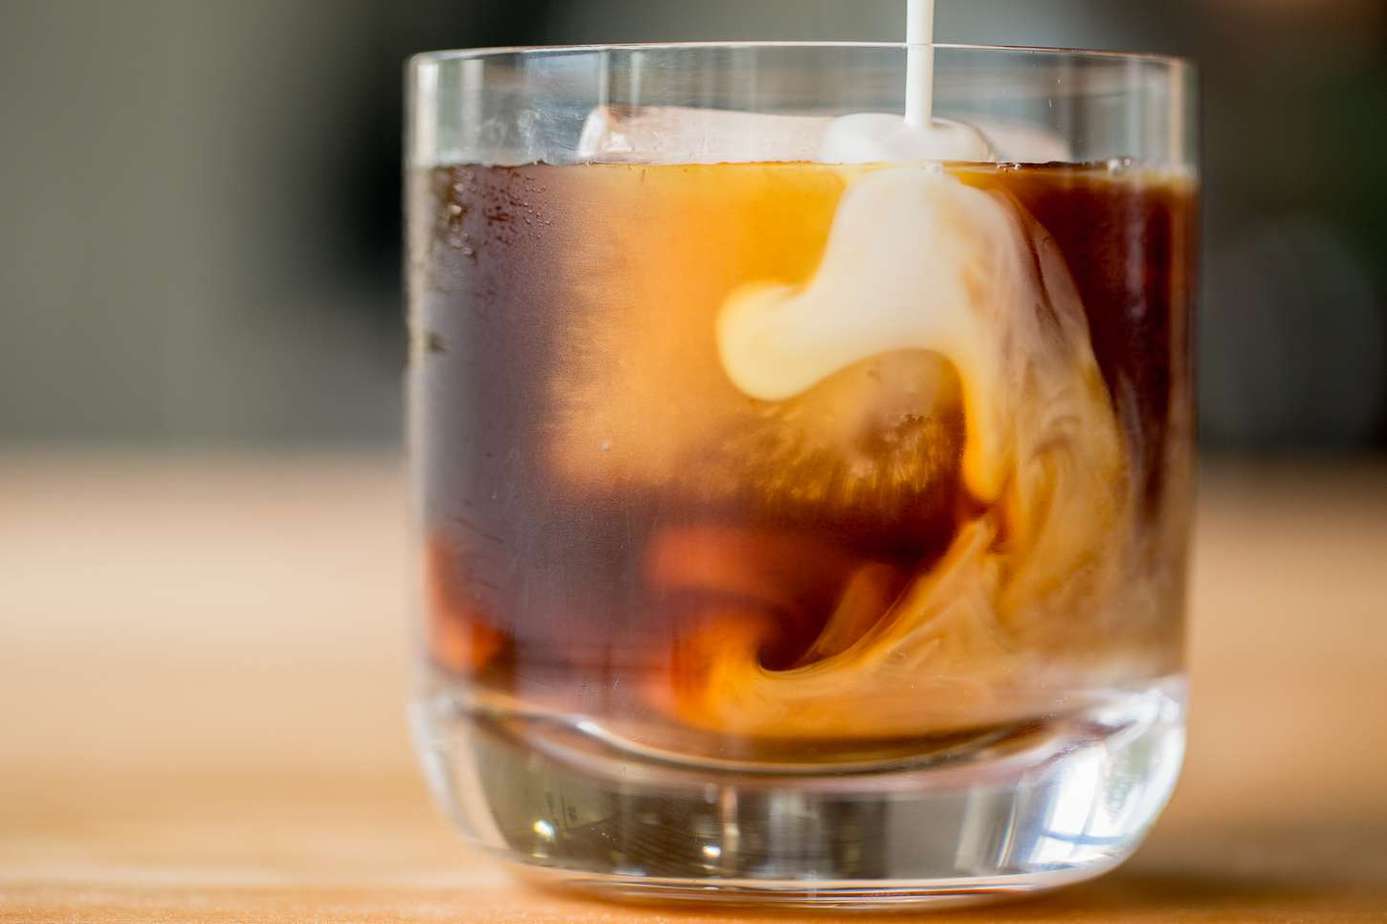 ICED BEVERAGE SALES SURGE AS COLD BREW BECOMES COFFEE SHOP MAINSTAY